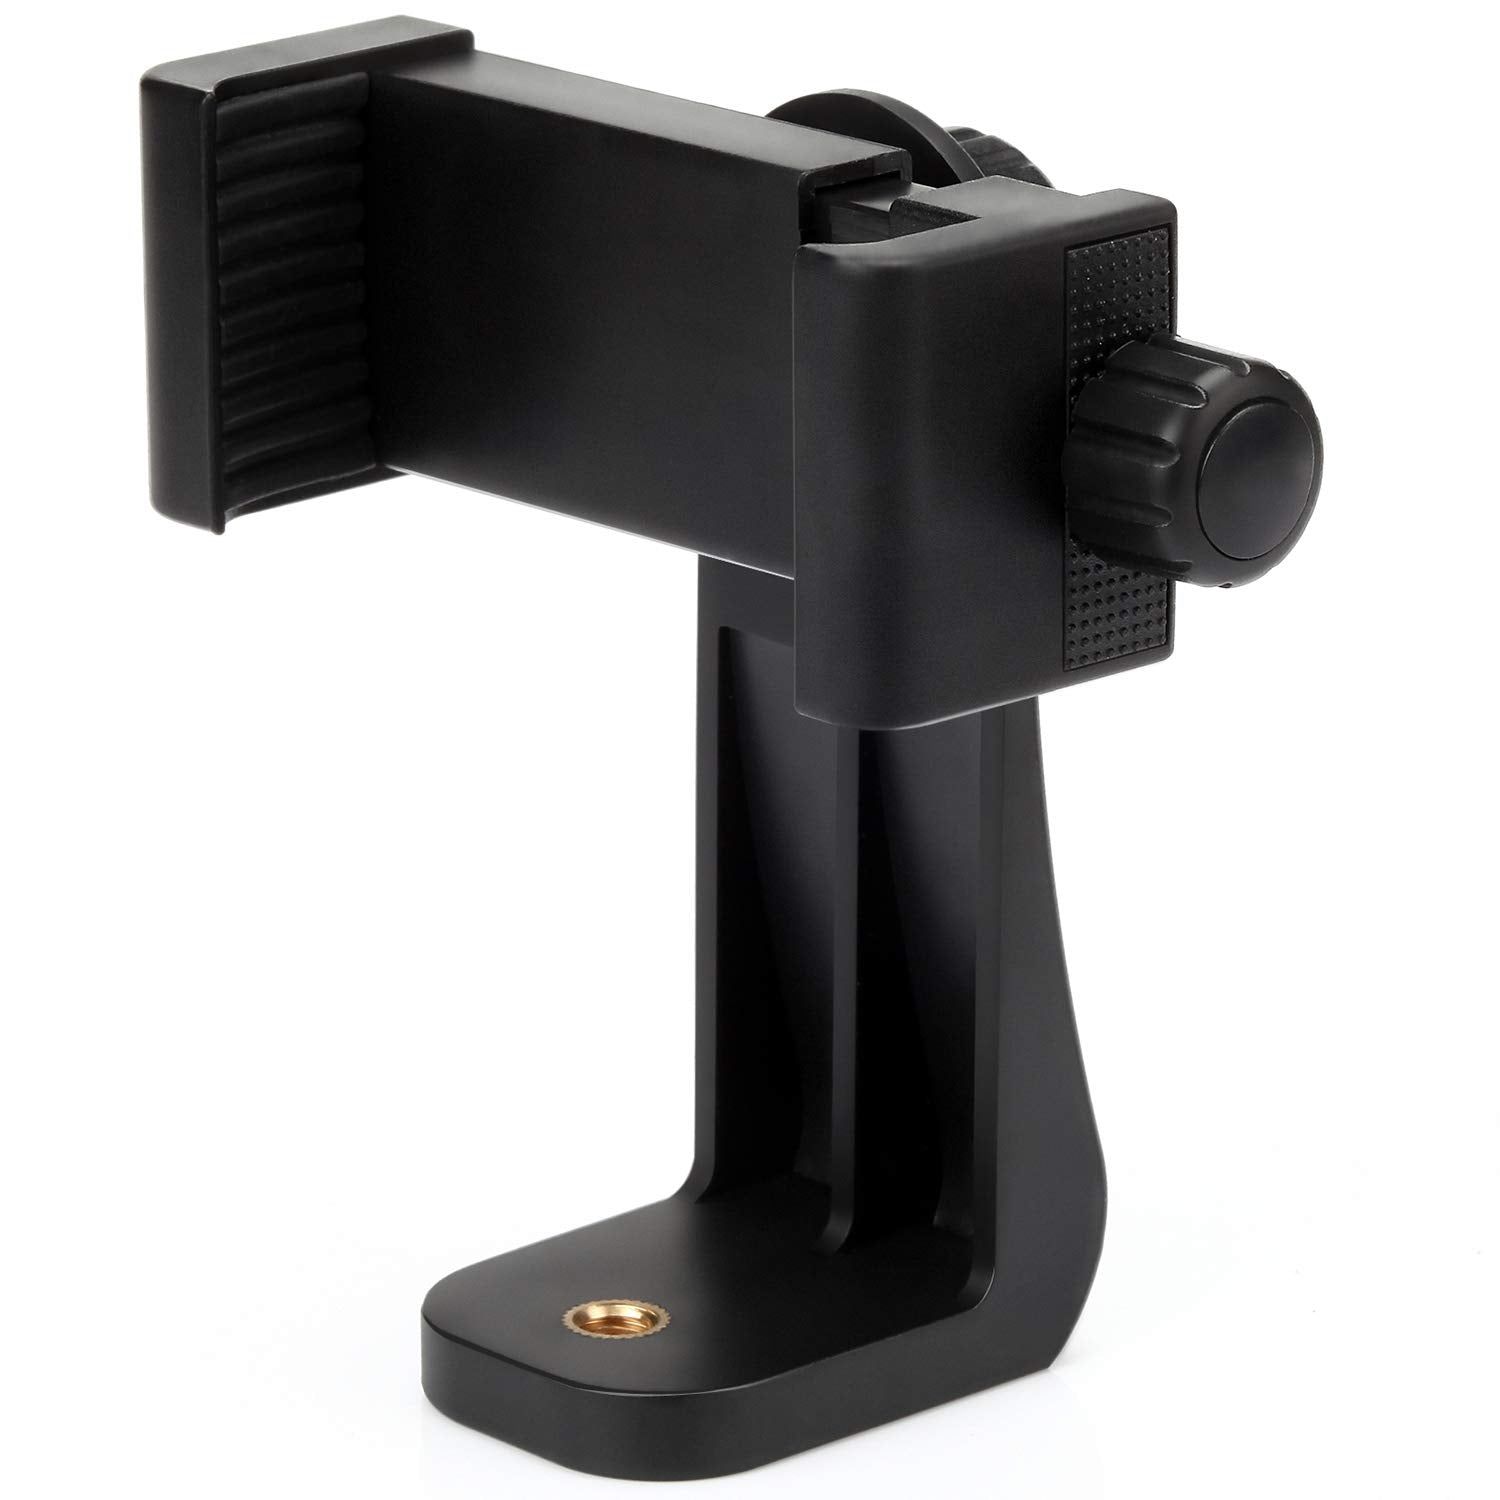 Vastar Universal Smartphone Tripod Adapter Cell Phone Holder Mount Adapter Fits iPhone Samsung and All Phones Rotates Vertical